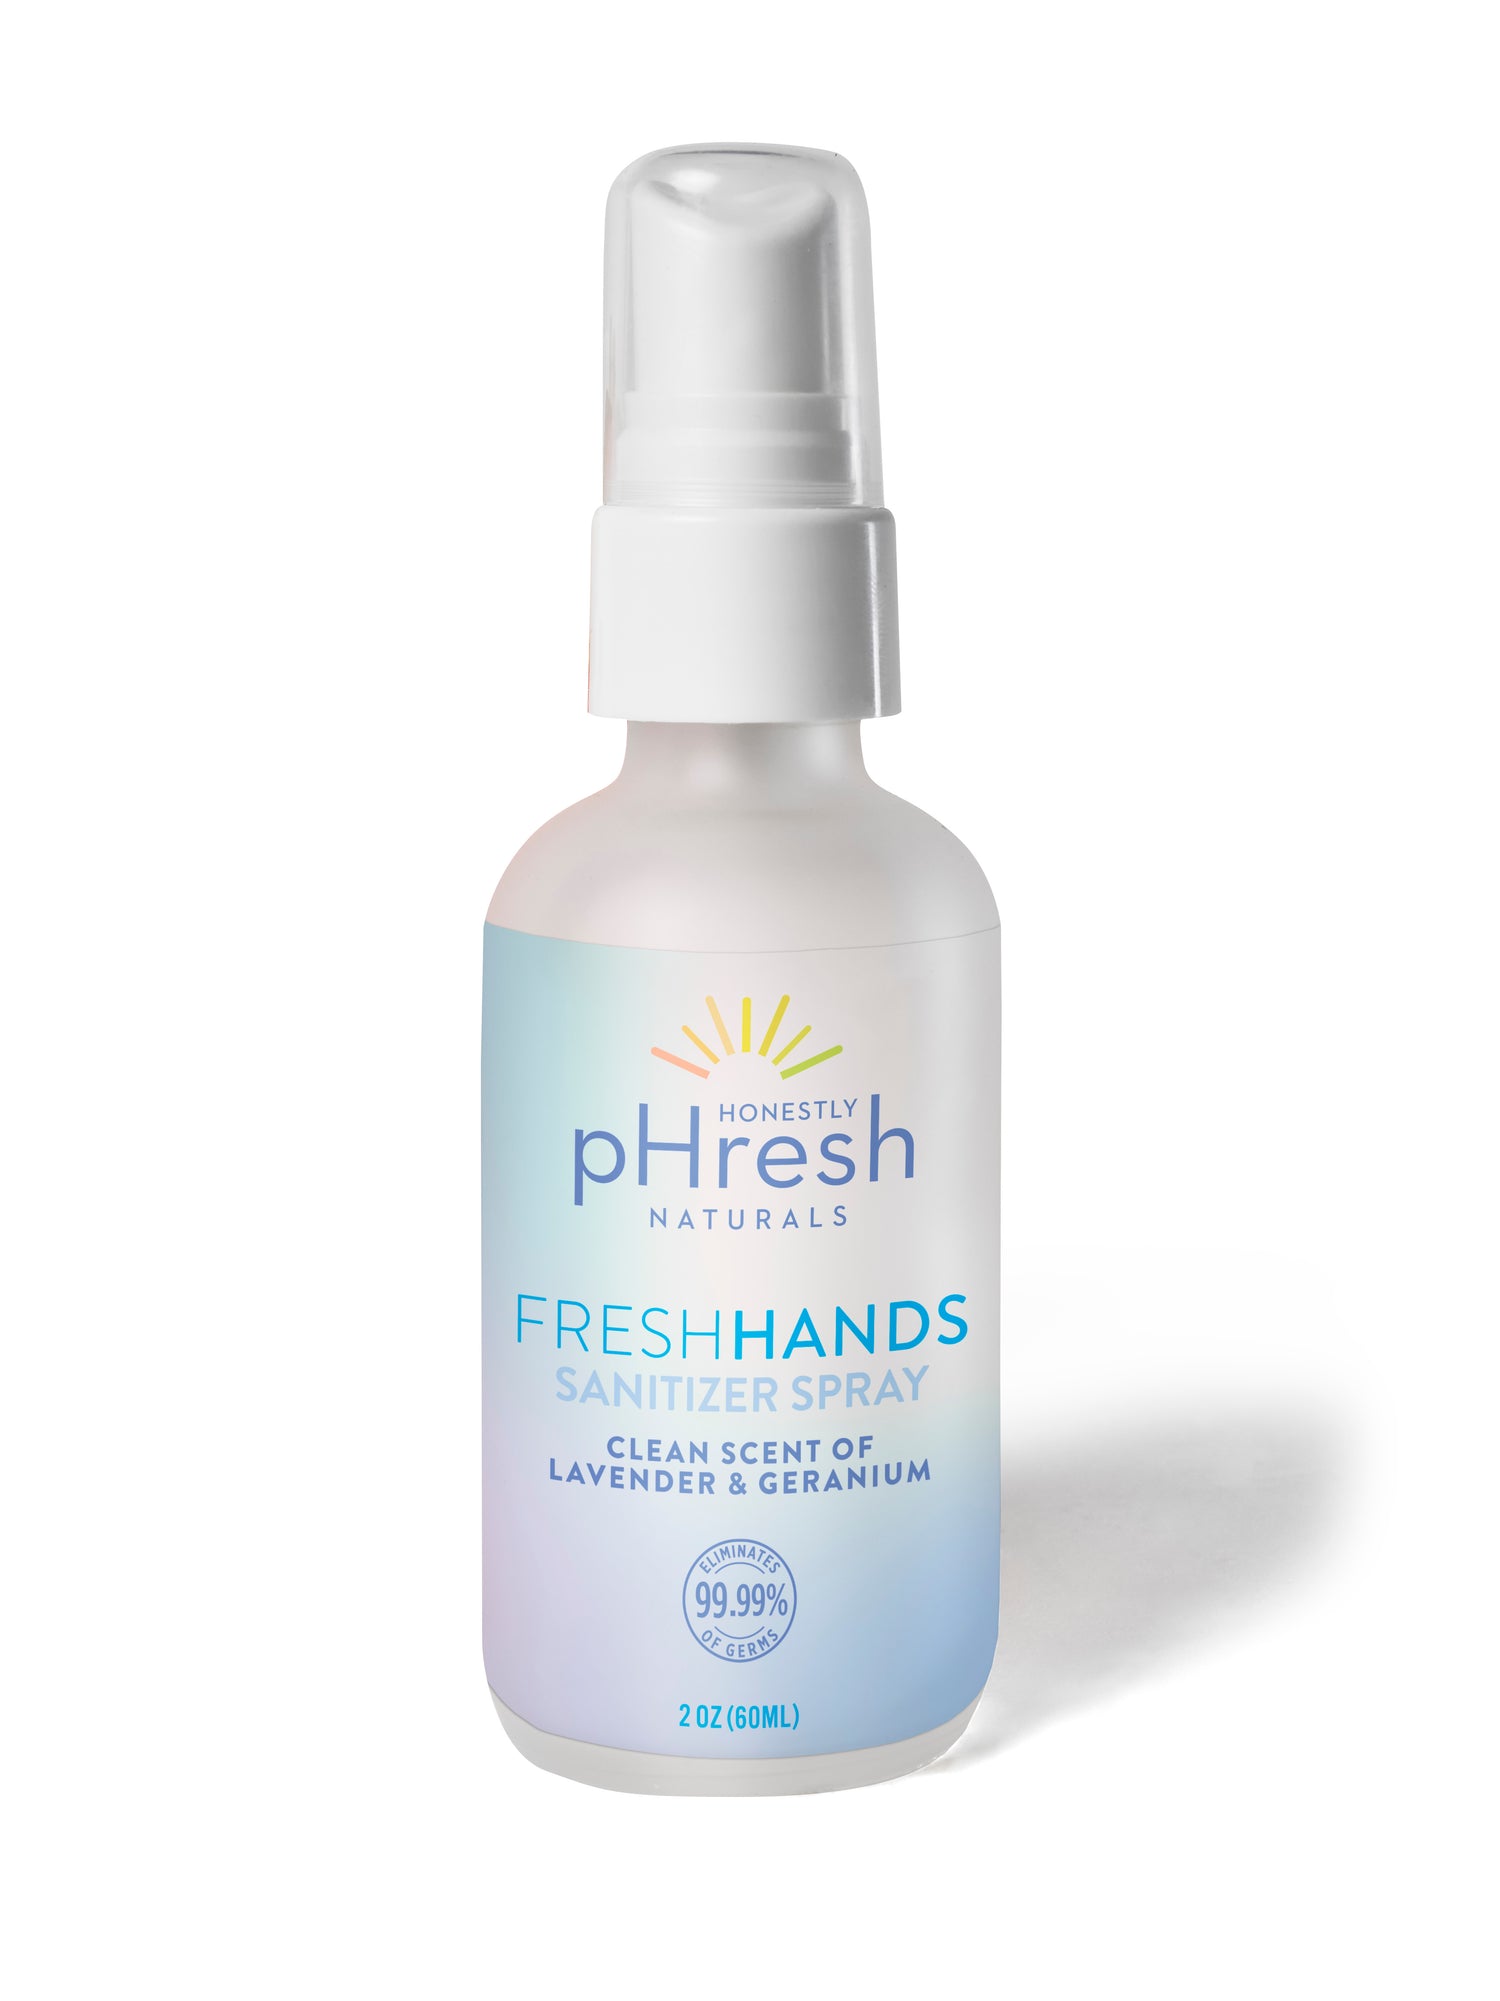 “Fresh Hands” on demand, introducing our NEW Hand Sanitizer Spray